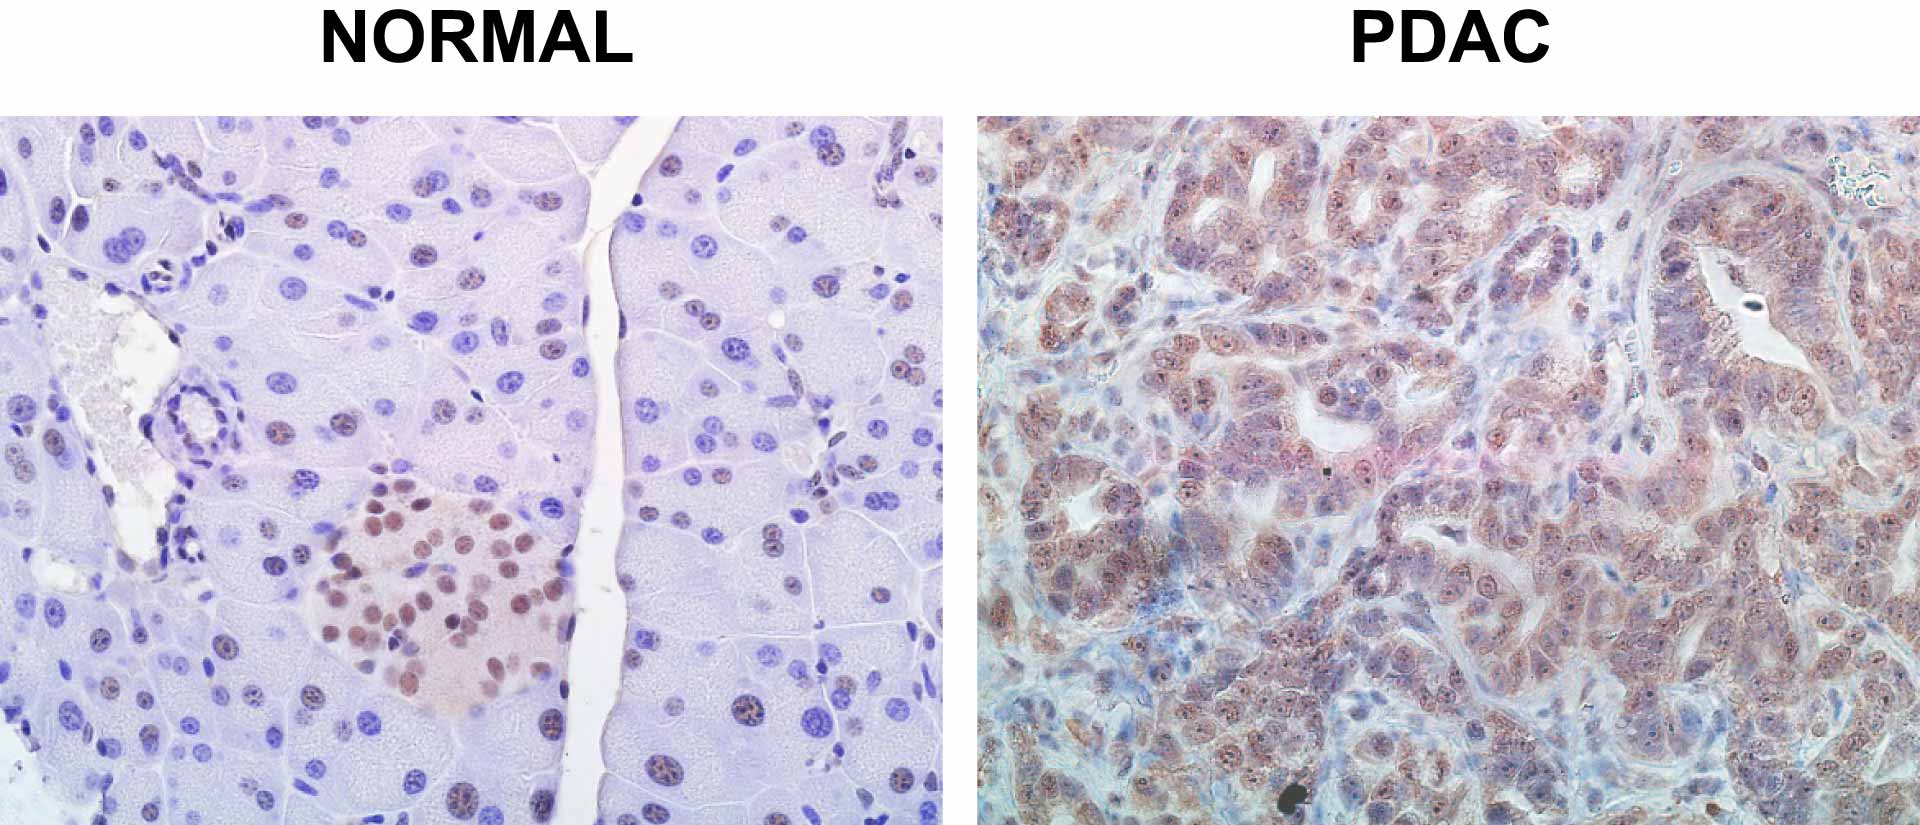 Image of normal and PDAC pancreas cell comparison